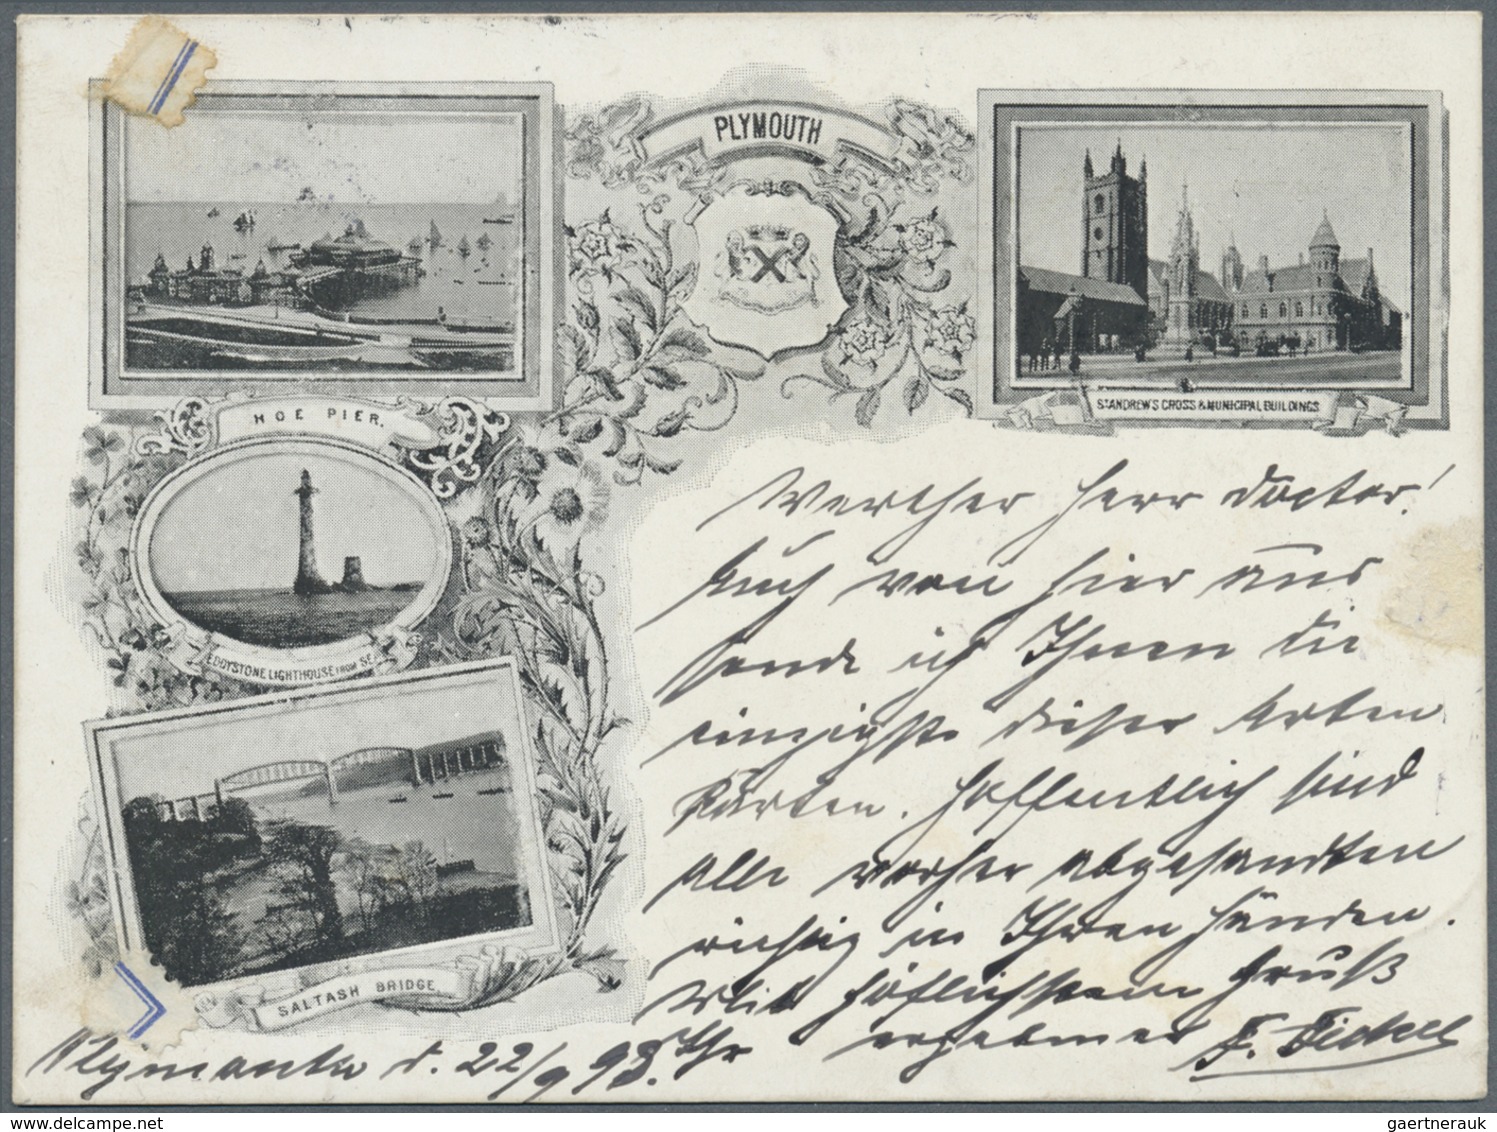 Großbritannien: 1898/1955, 96 early picture postcards, many from 1898 in co called "small size" with